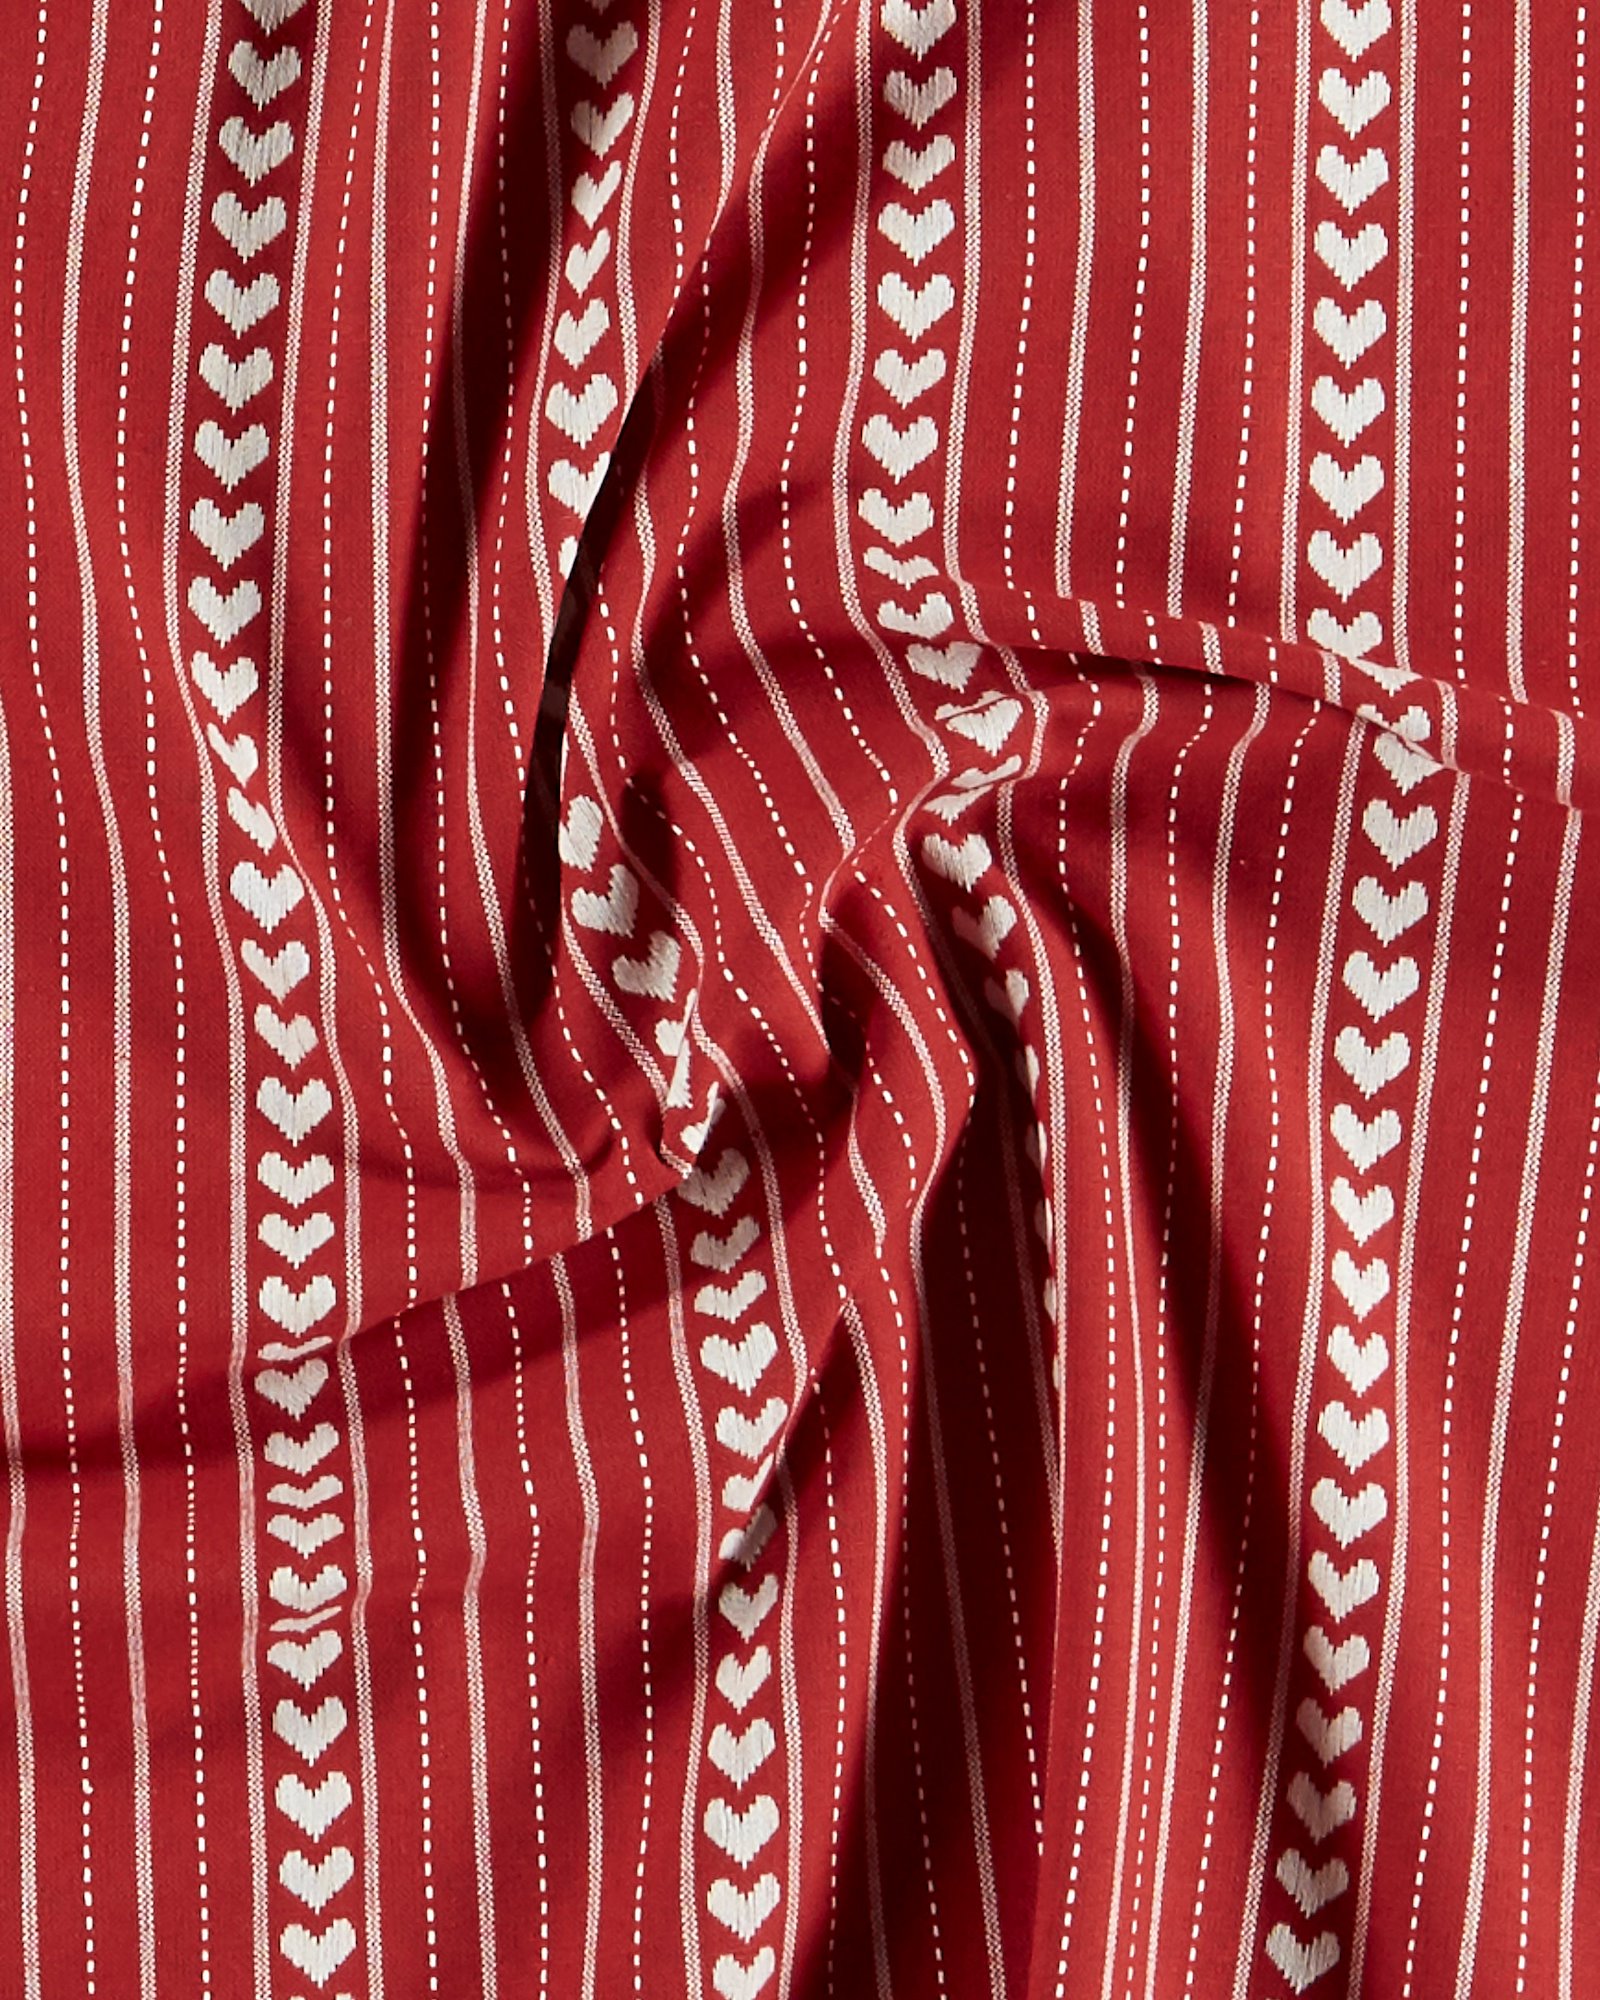 Woven cotton red w YD stripes and hearts 816314_pack